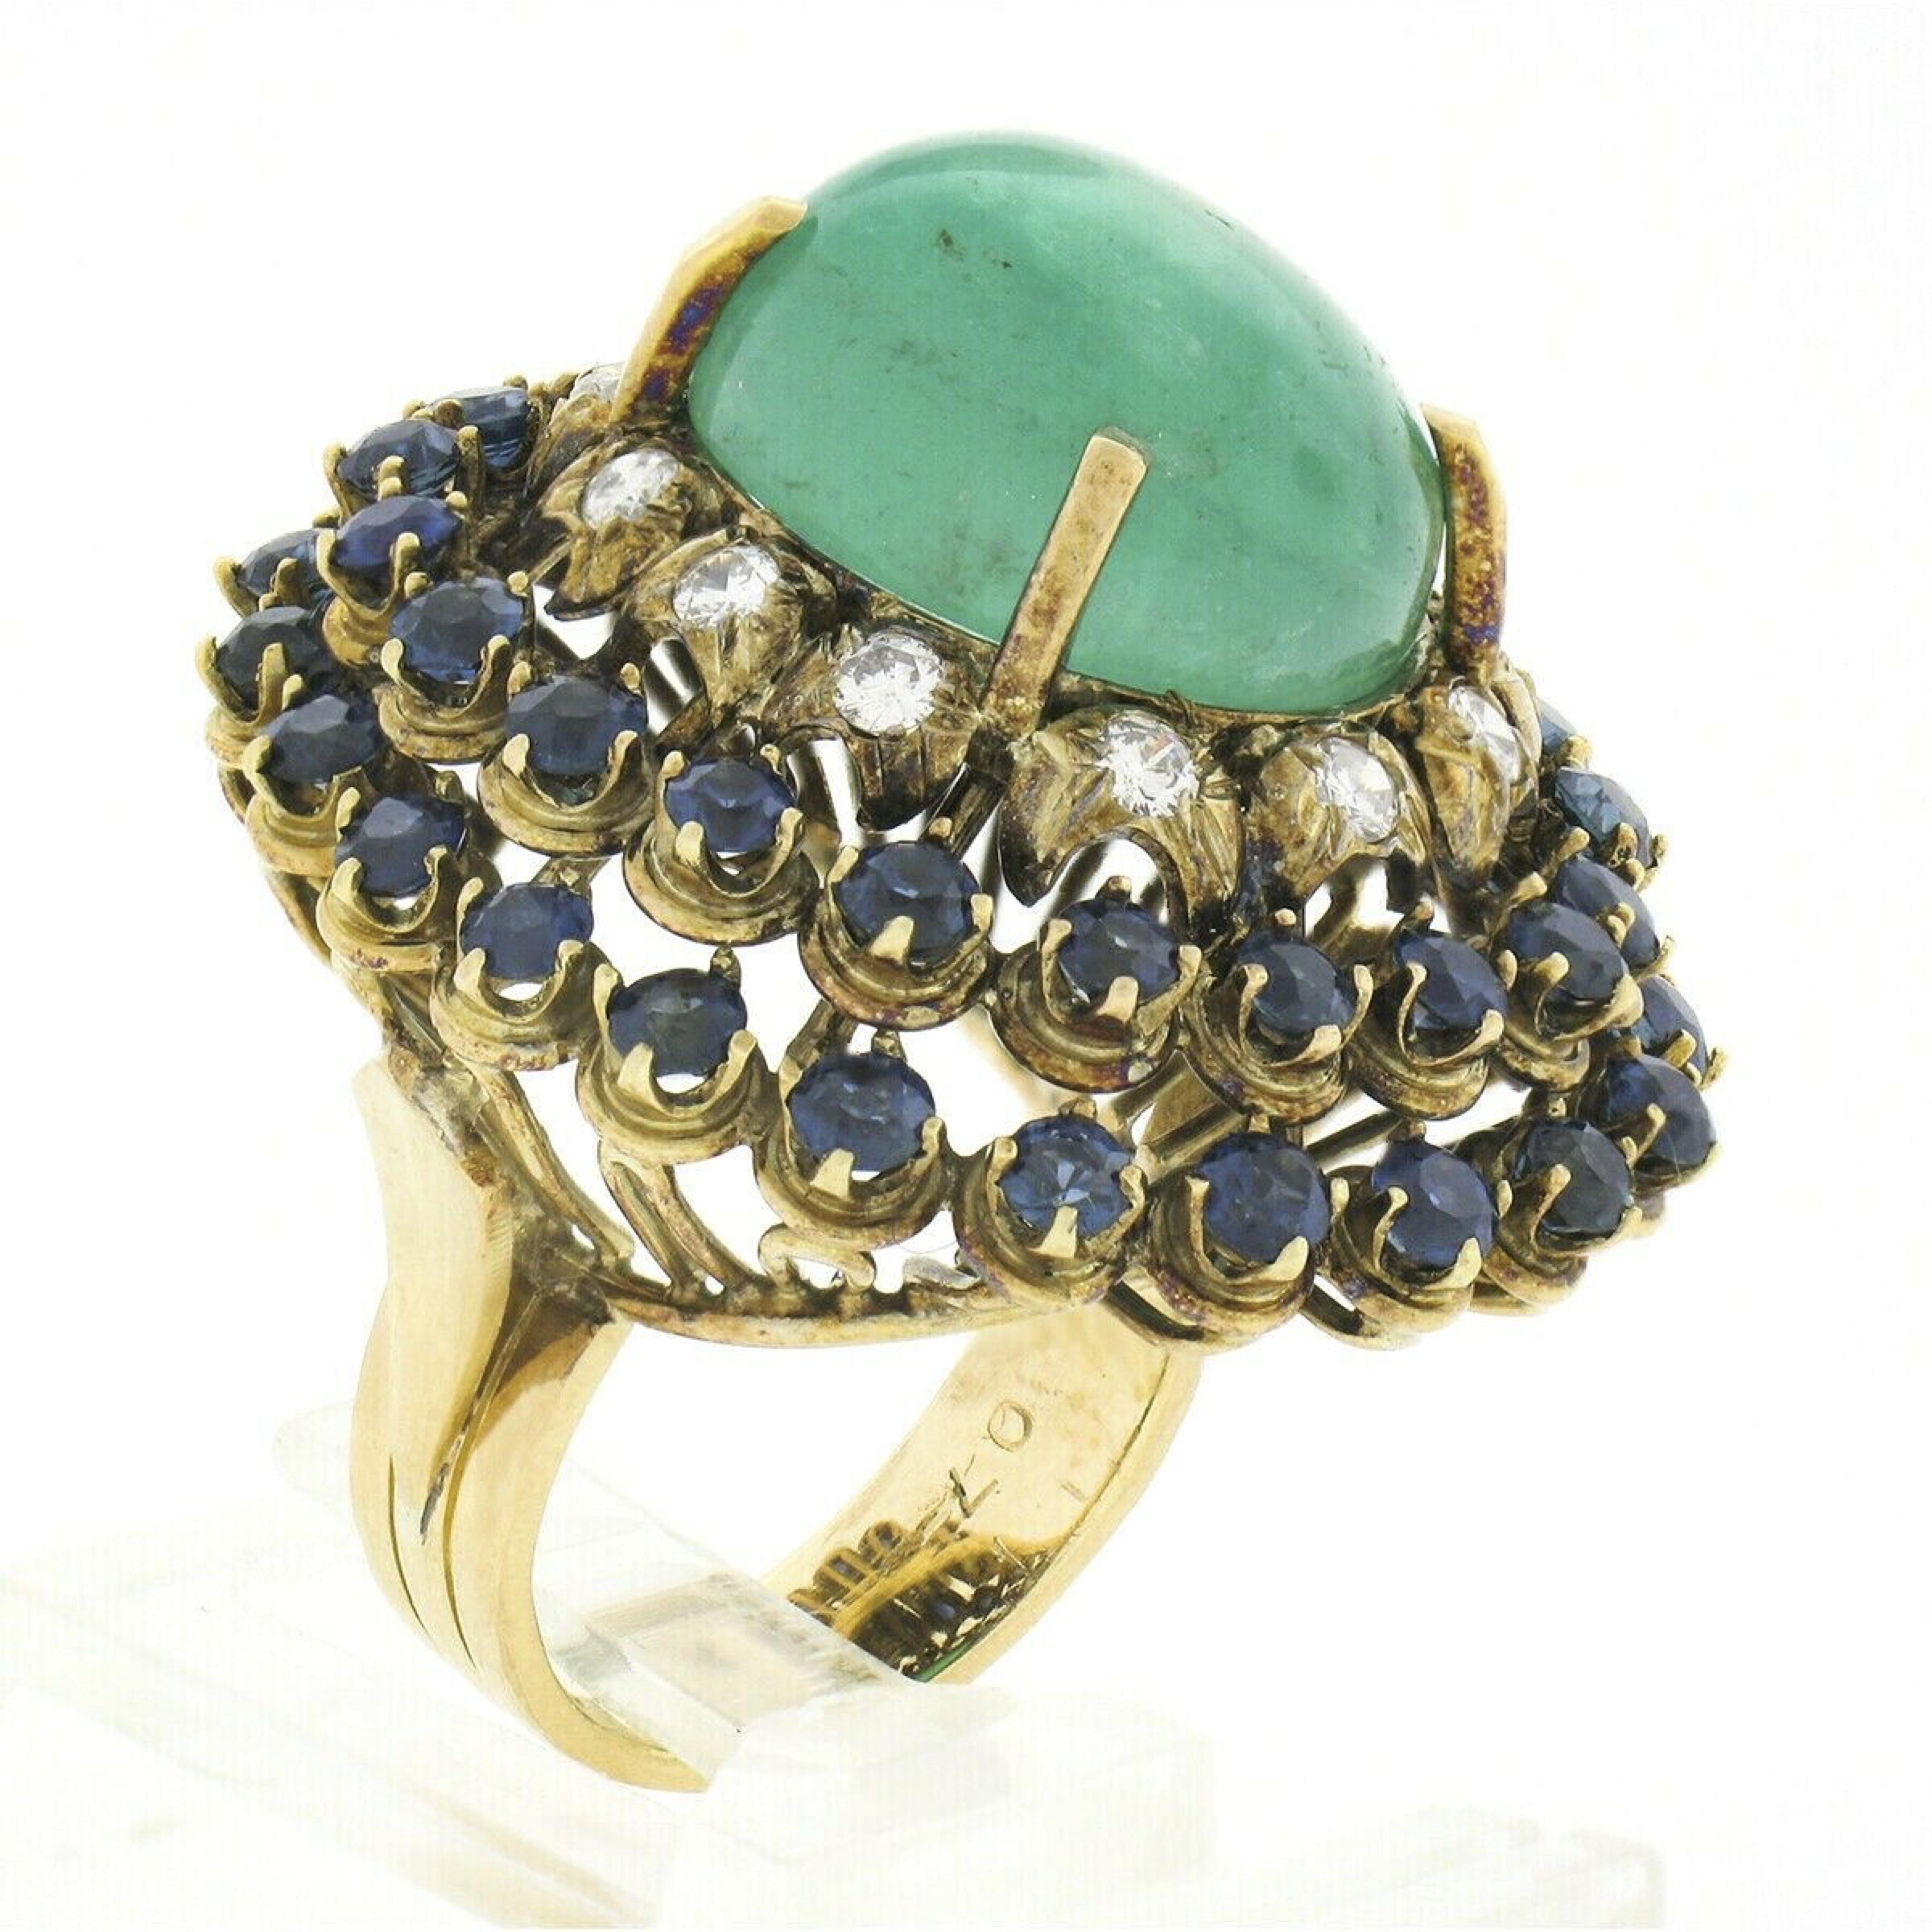 You are looking at a truly fine and breathtaking, GIA certified emerald, sapphire and diamond vintage cocktail ring crafted in solid 18k yellow gold. This very large and showy ring features a fine quality, high-domed, oval cabochon cut emerald